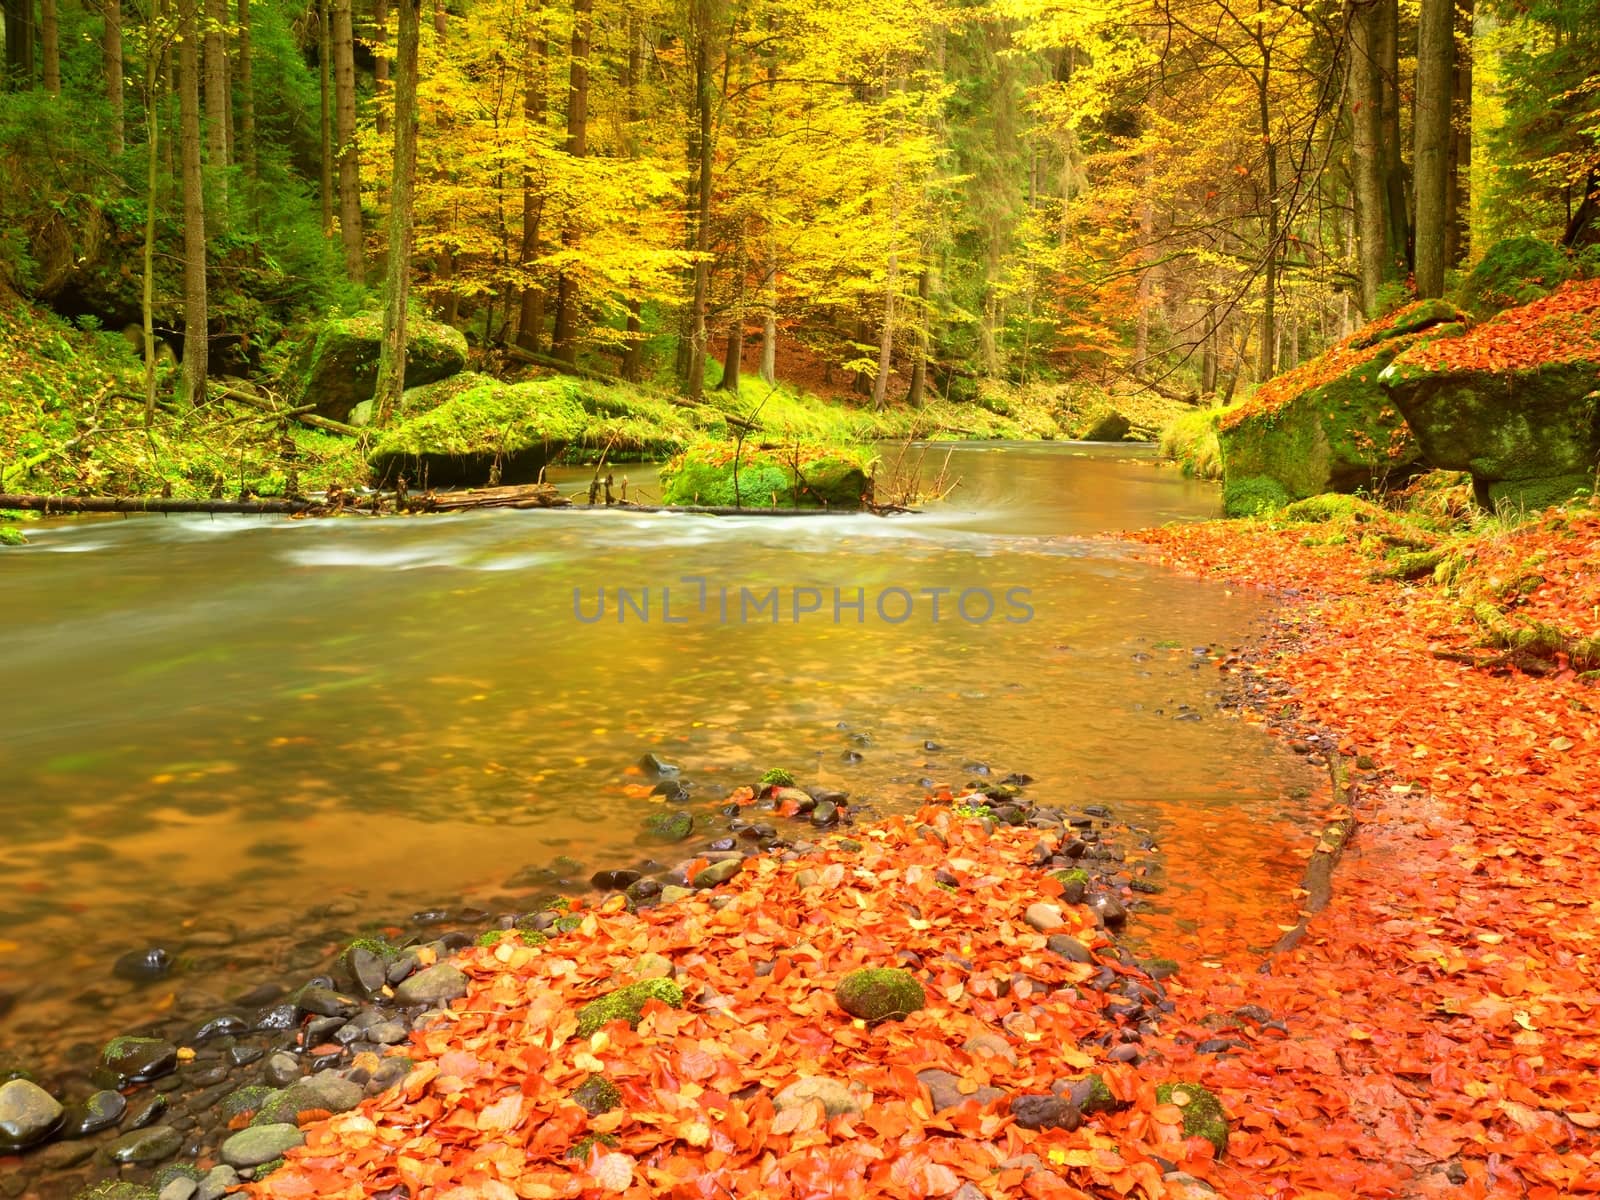 Fall at mountain river. Low level of water, gravel with vivid colorful leaves. Mossy boulders on river bank, yellow orange  leaves on trees.